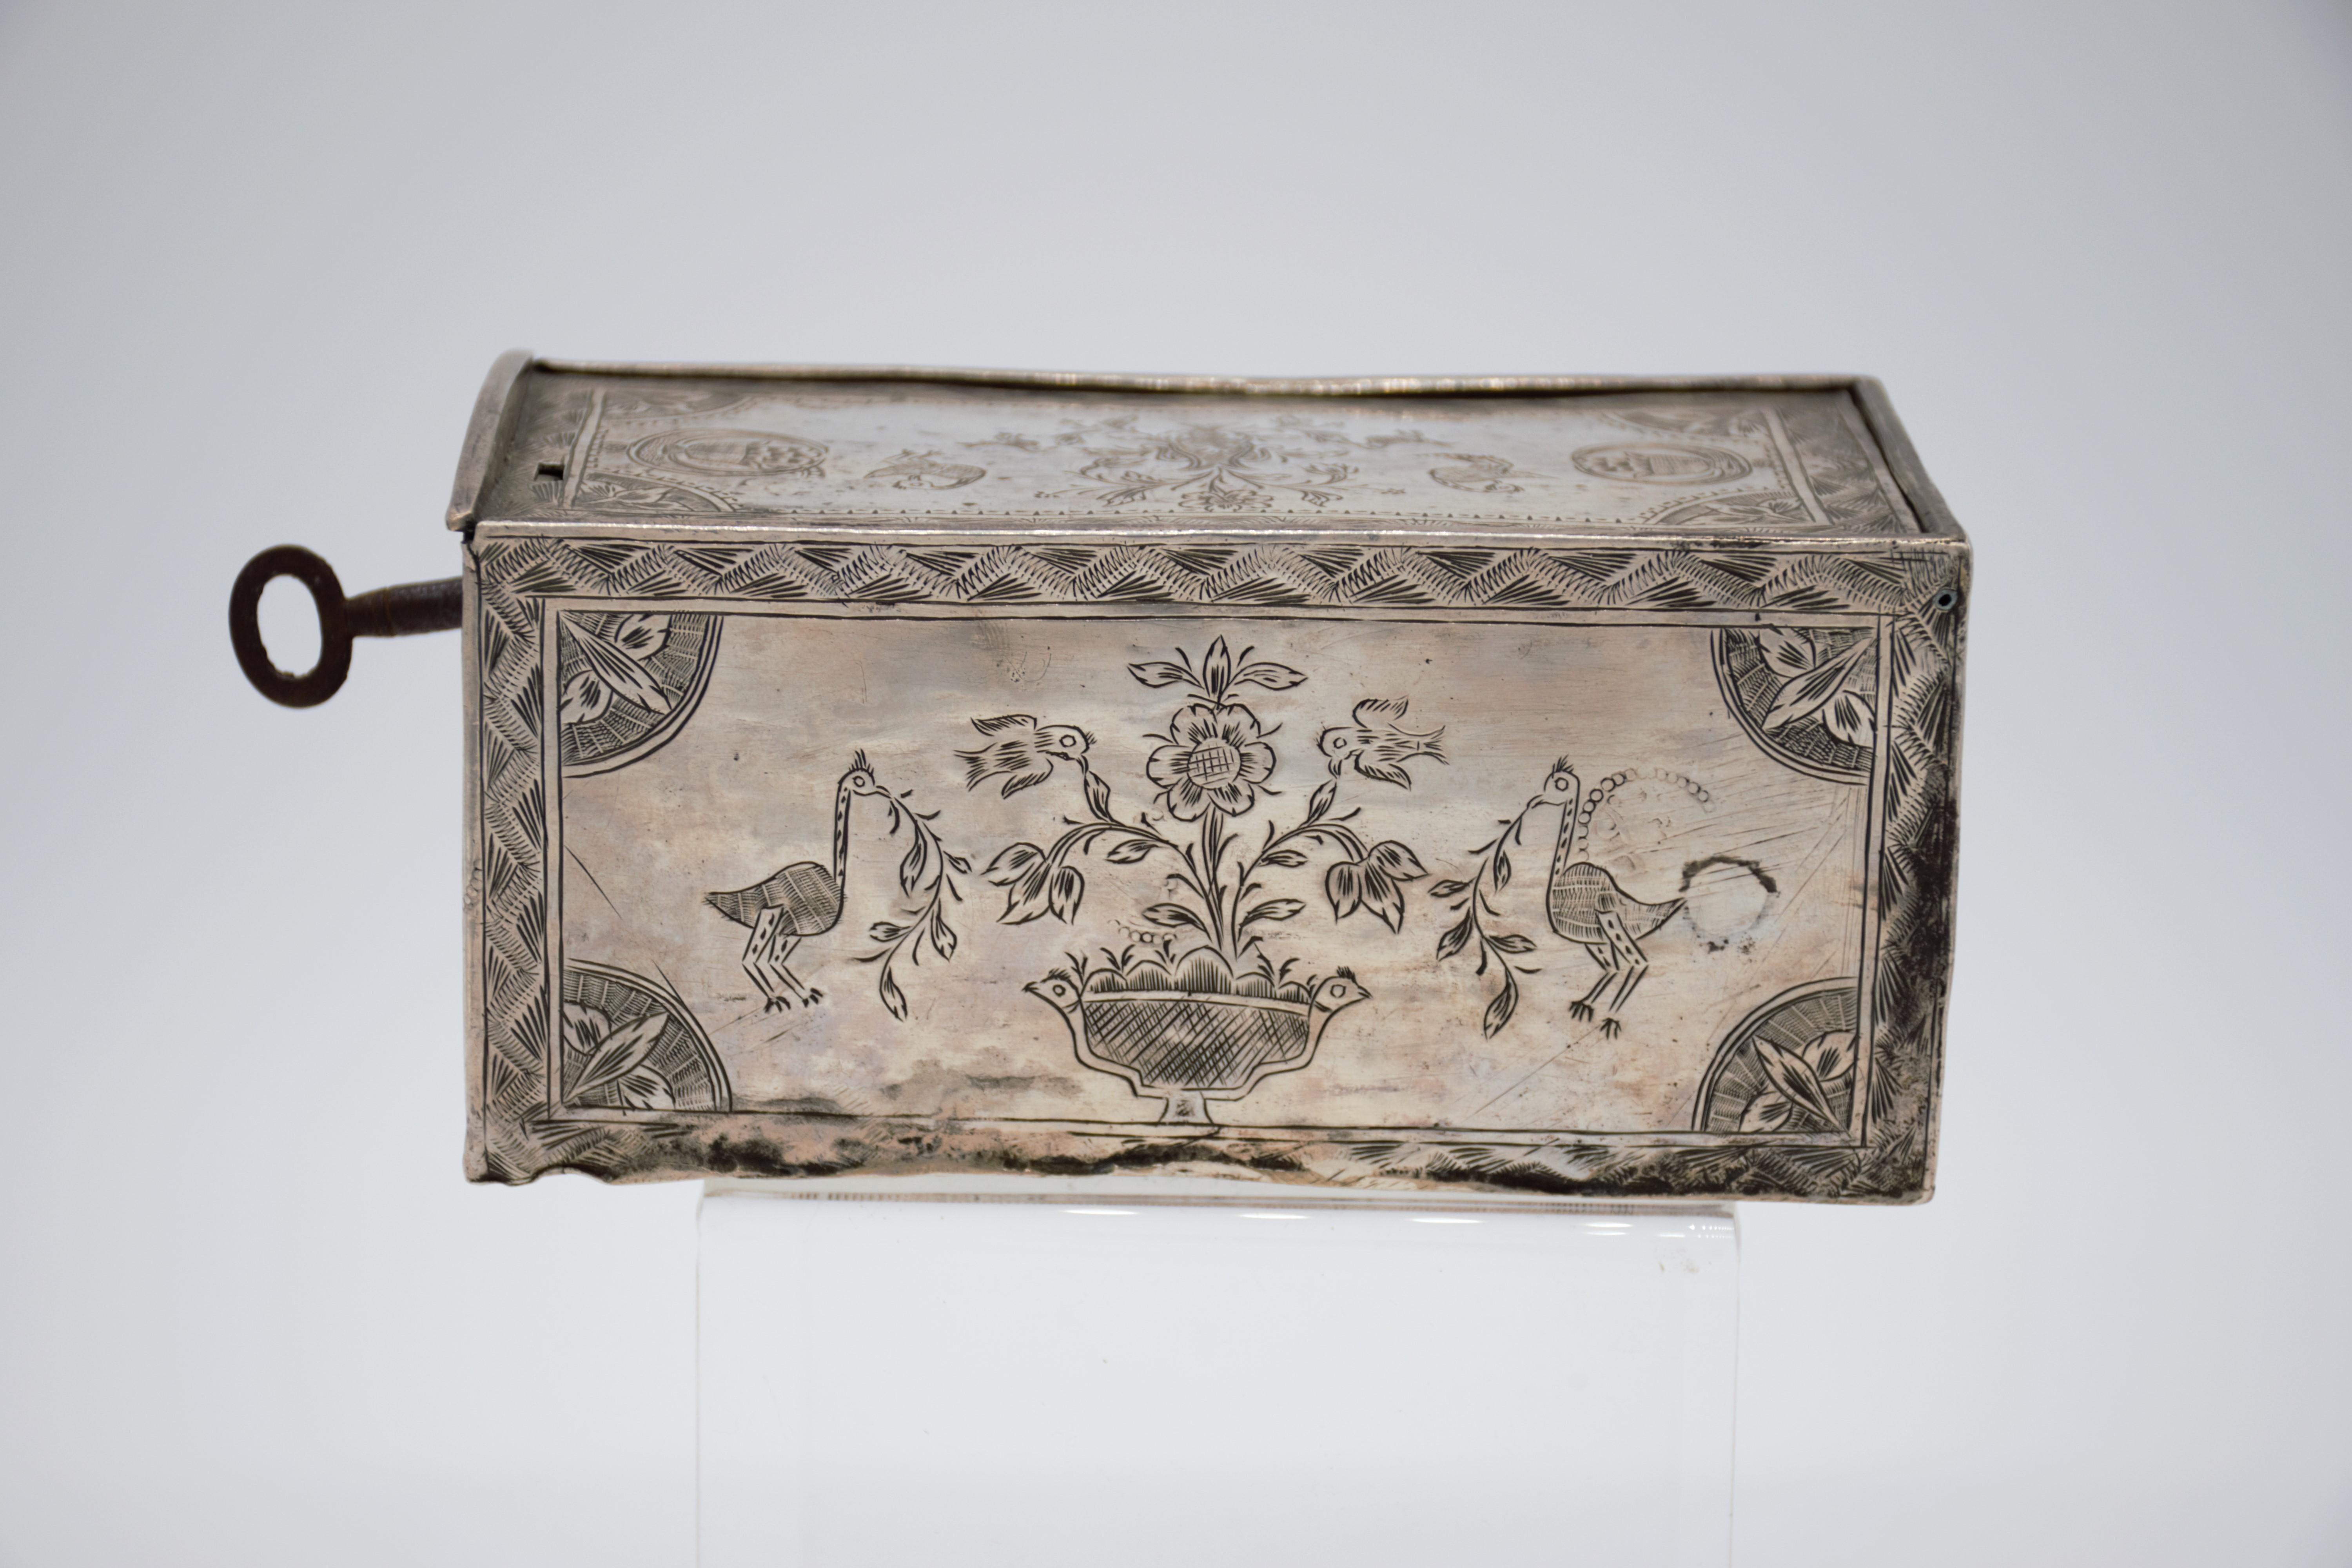 
Amazing and scarce JUDAICA object, we have here one of the most touching jewish objects we had for a long time, this small silver dowry box was made in Algeria in the early 19th century, it is all covered with symbols of jewish faith and of